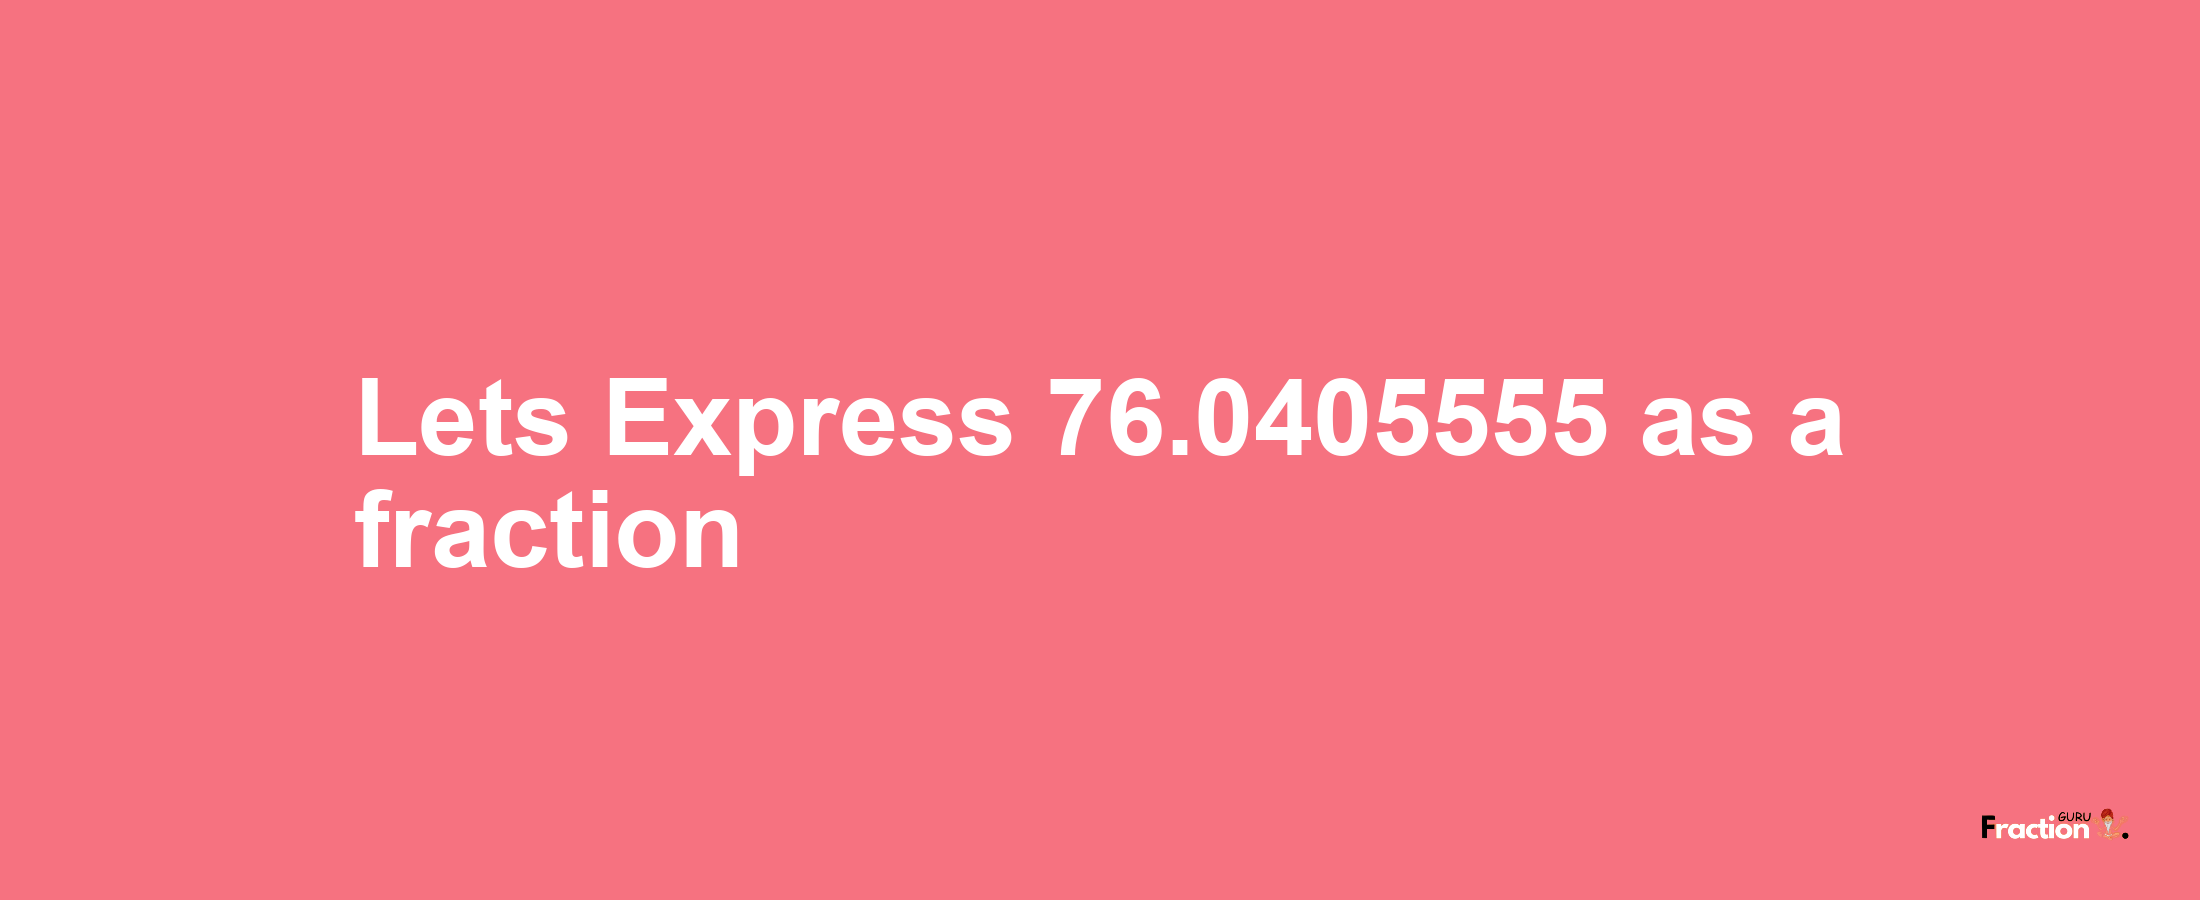 Lets Express 76.0405555 as afraction